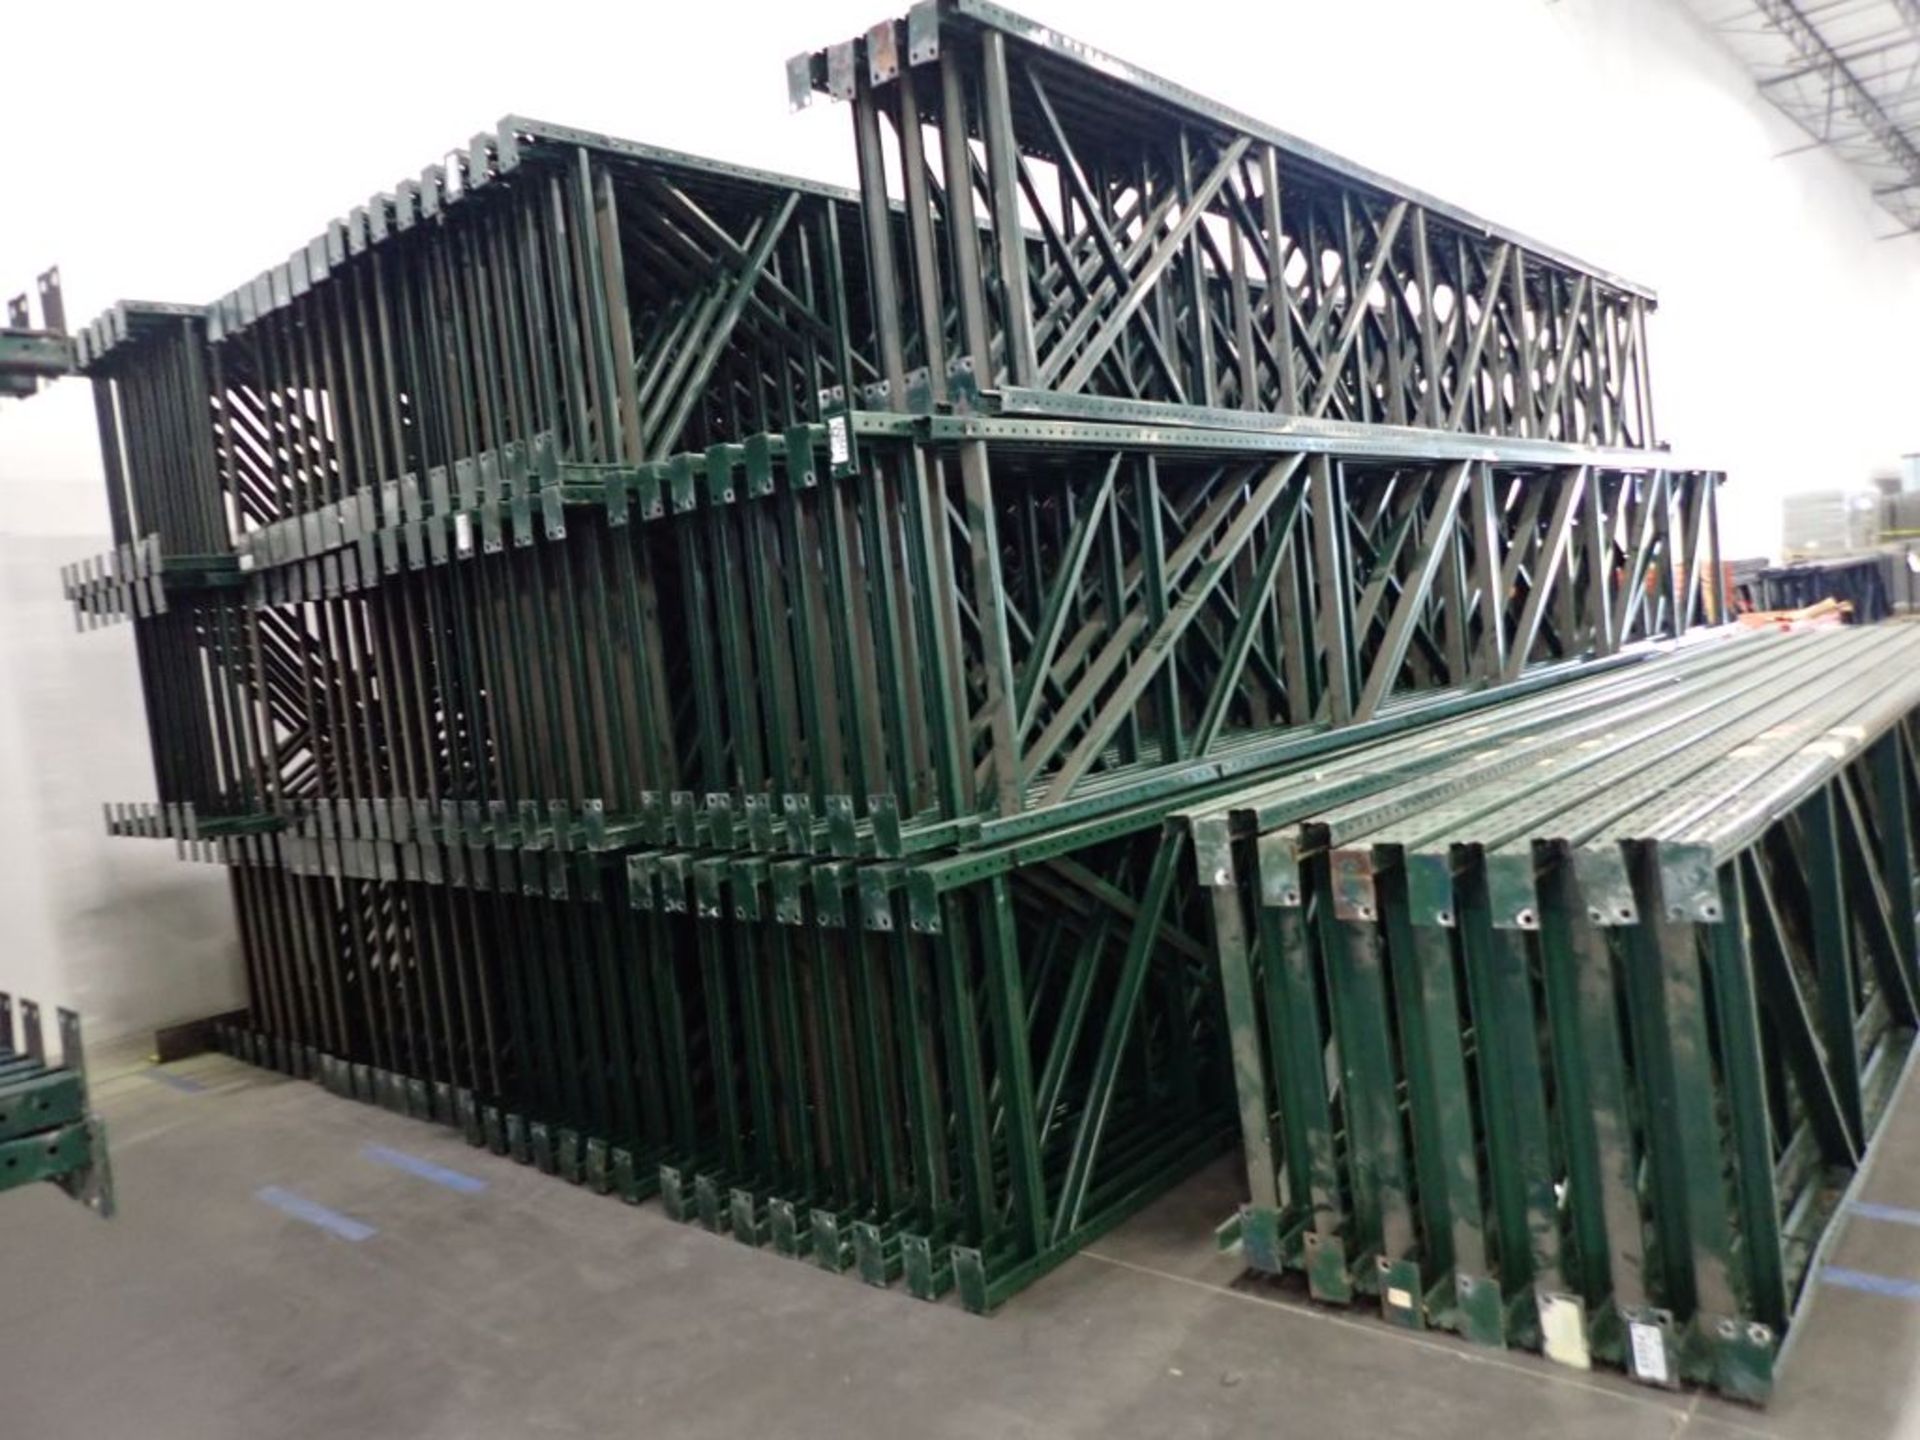 Lot of (15) 22' RUR Slotted Uprights - Image 3 of 5